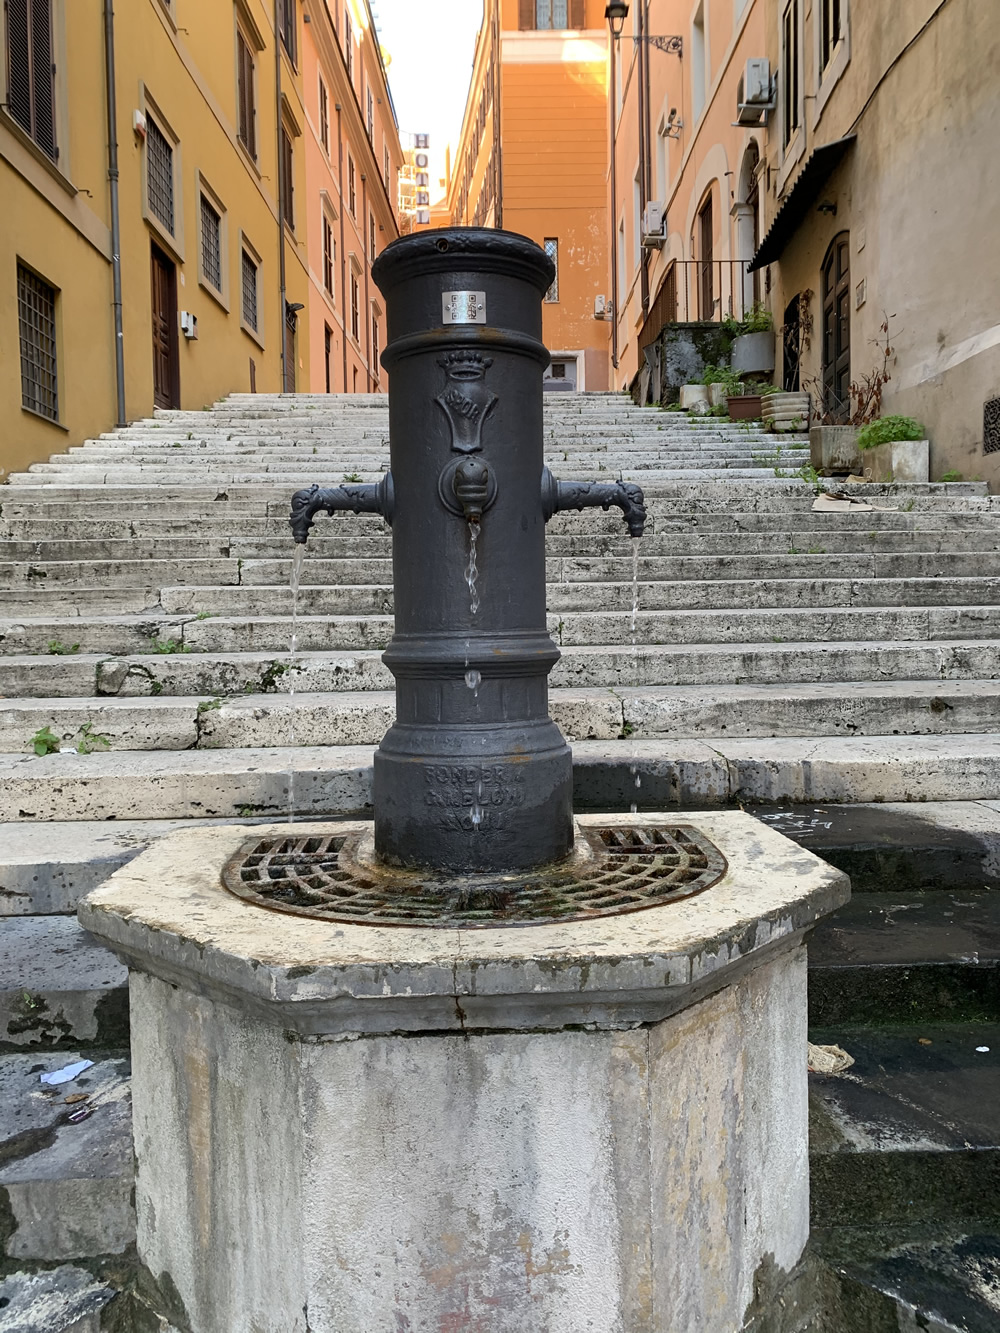 Rome drinking fountains